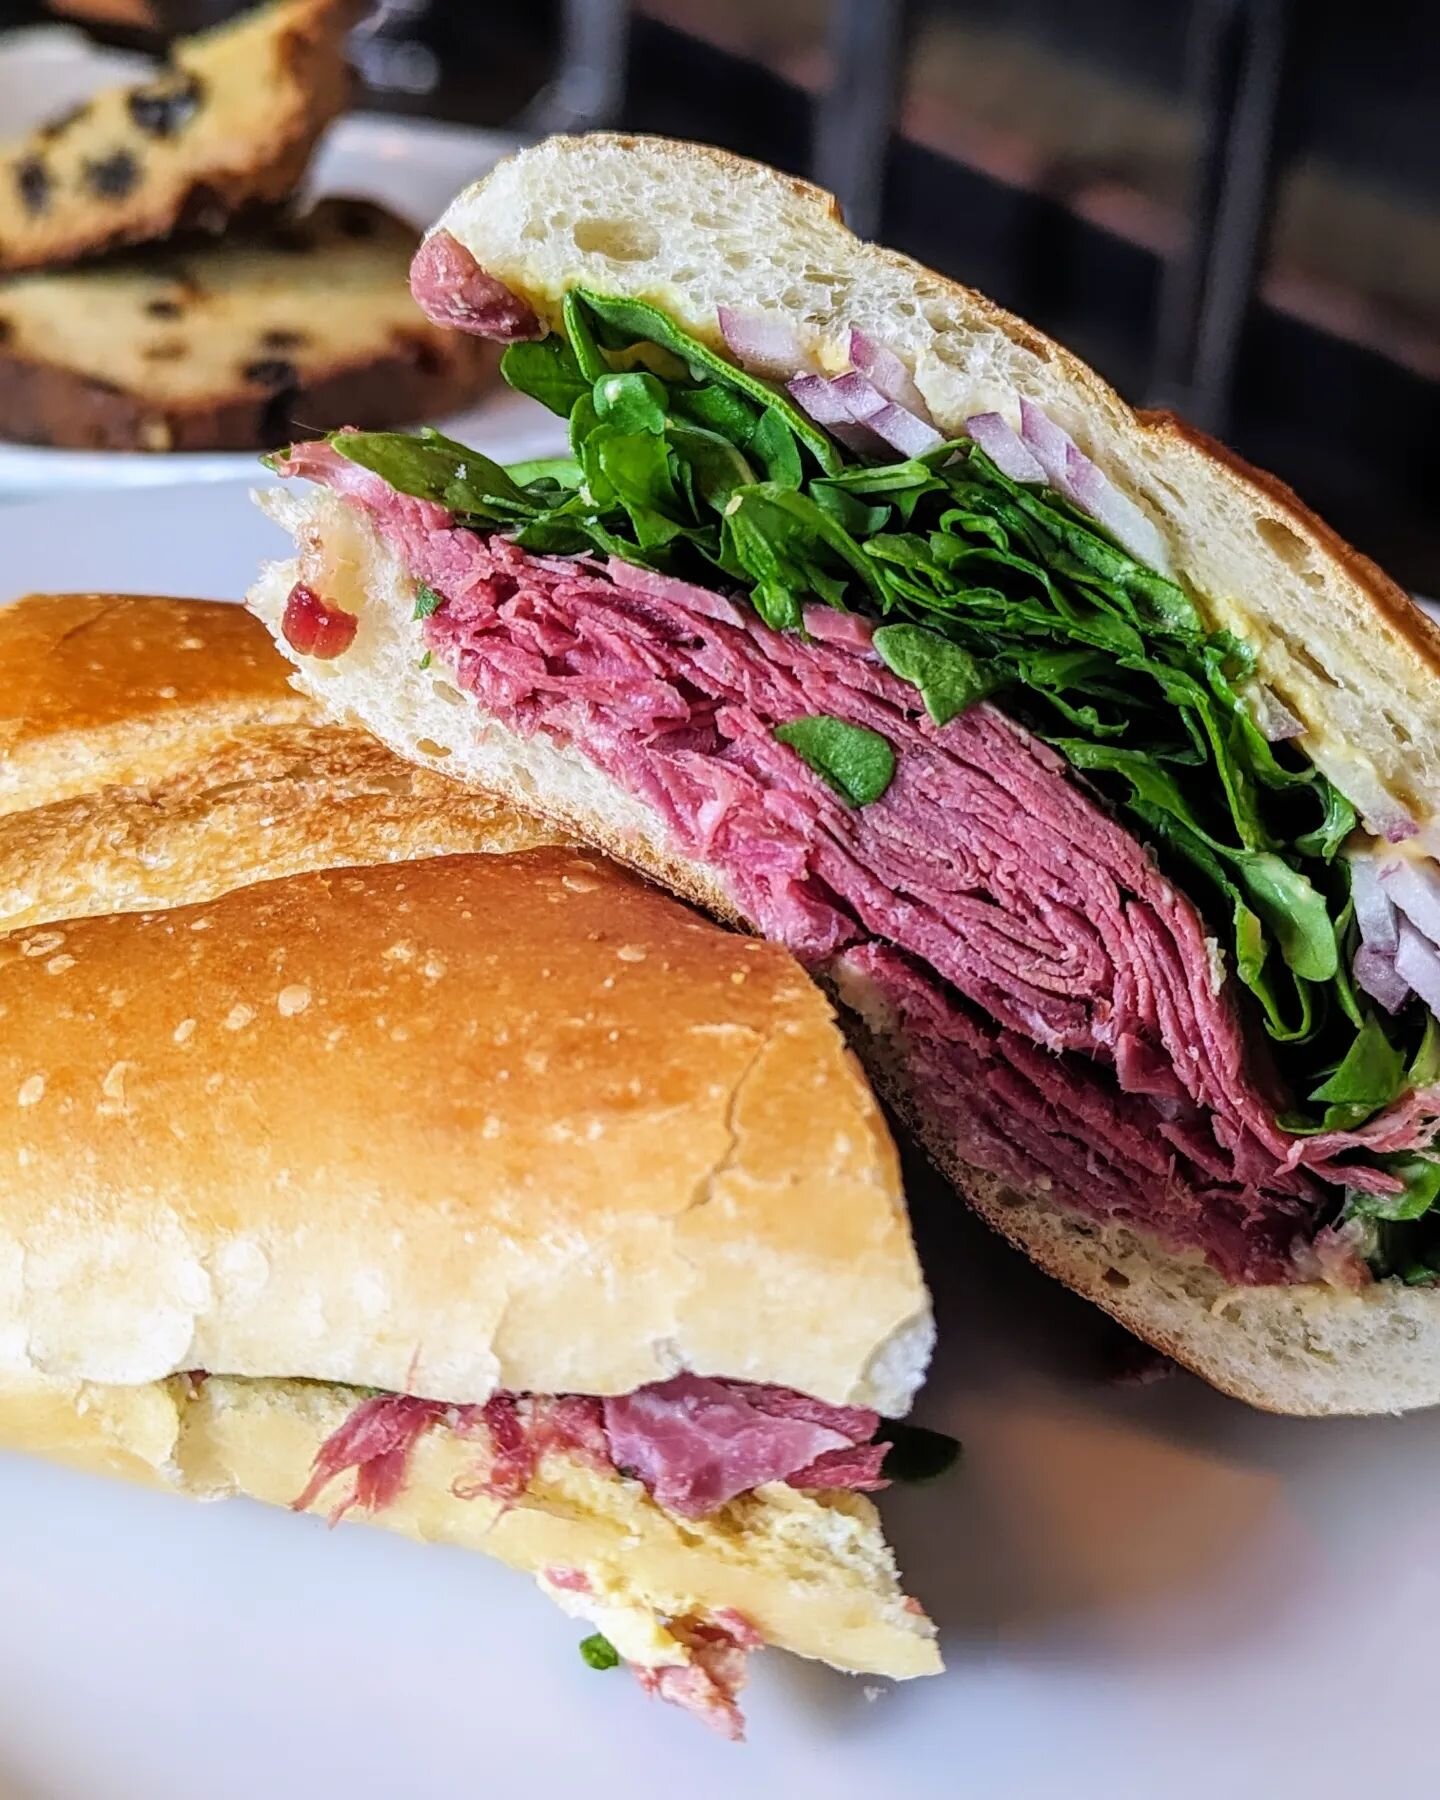 ☘️Best kept secret in town... Chef Dean's Corned Beef &amp; Cabbage from his Irish roots. Here's our delicious Corned Beef Sandwich with red onion, arugula &amp; Dijon mustard.  Come visit us tomorrow for a Guinness and a plate! Sl&aacute;inte! 🍻 Ha